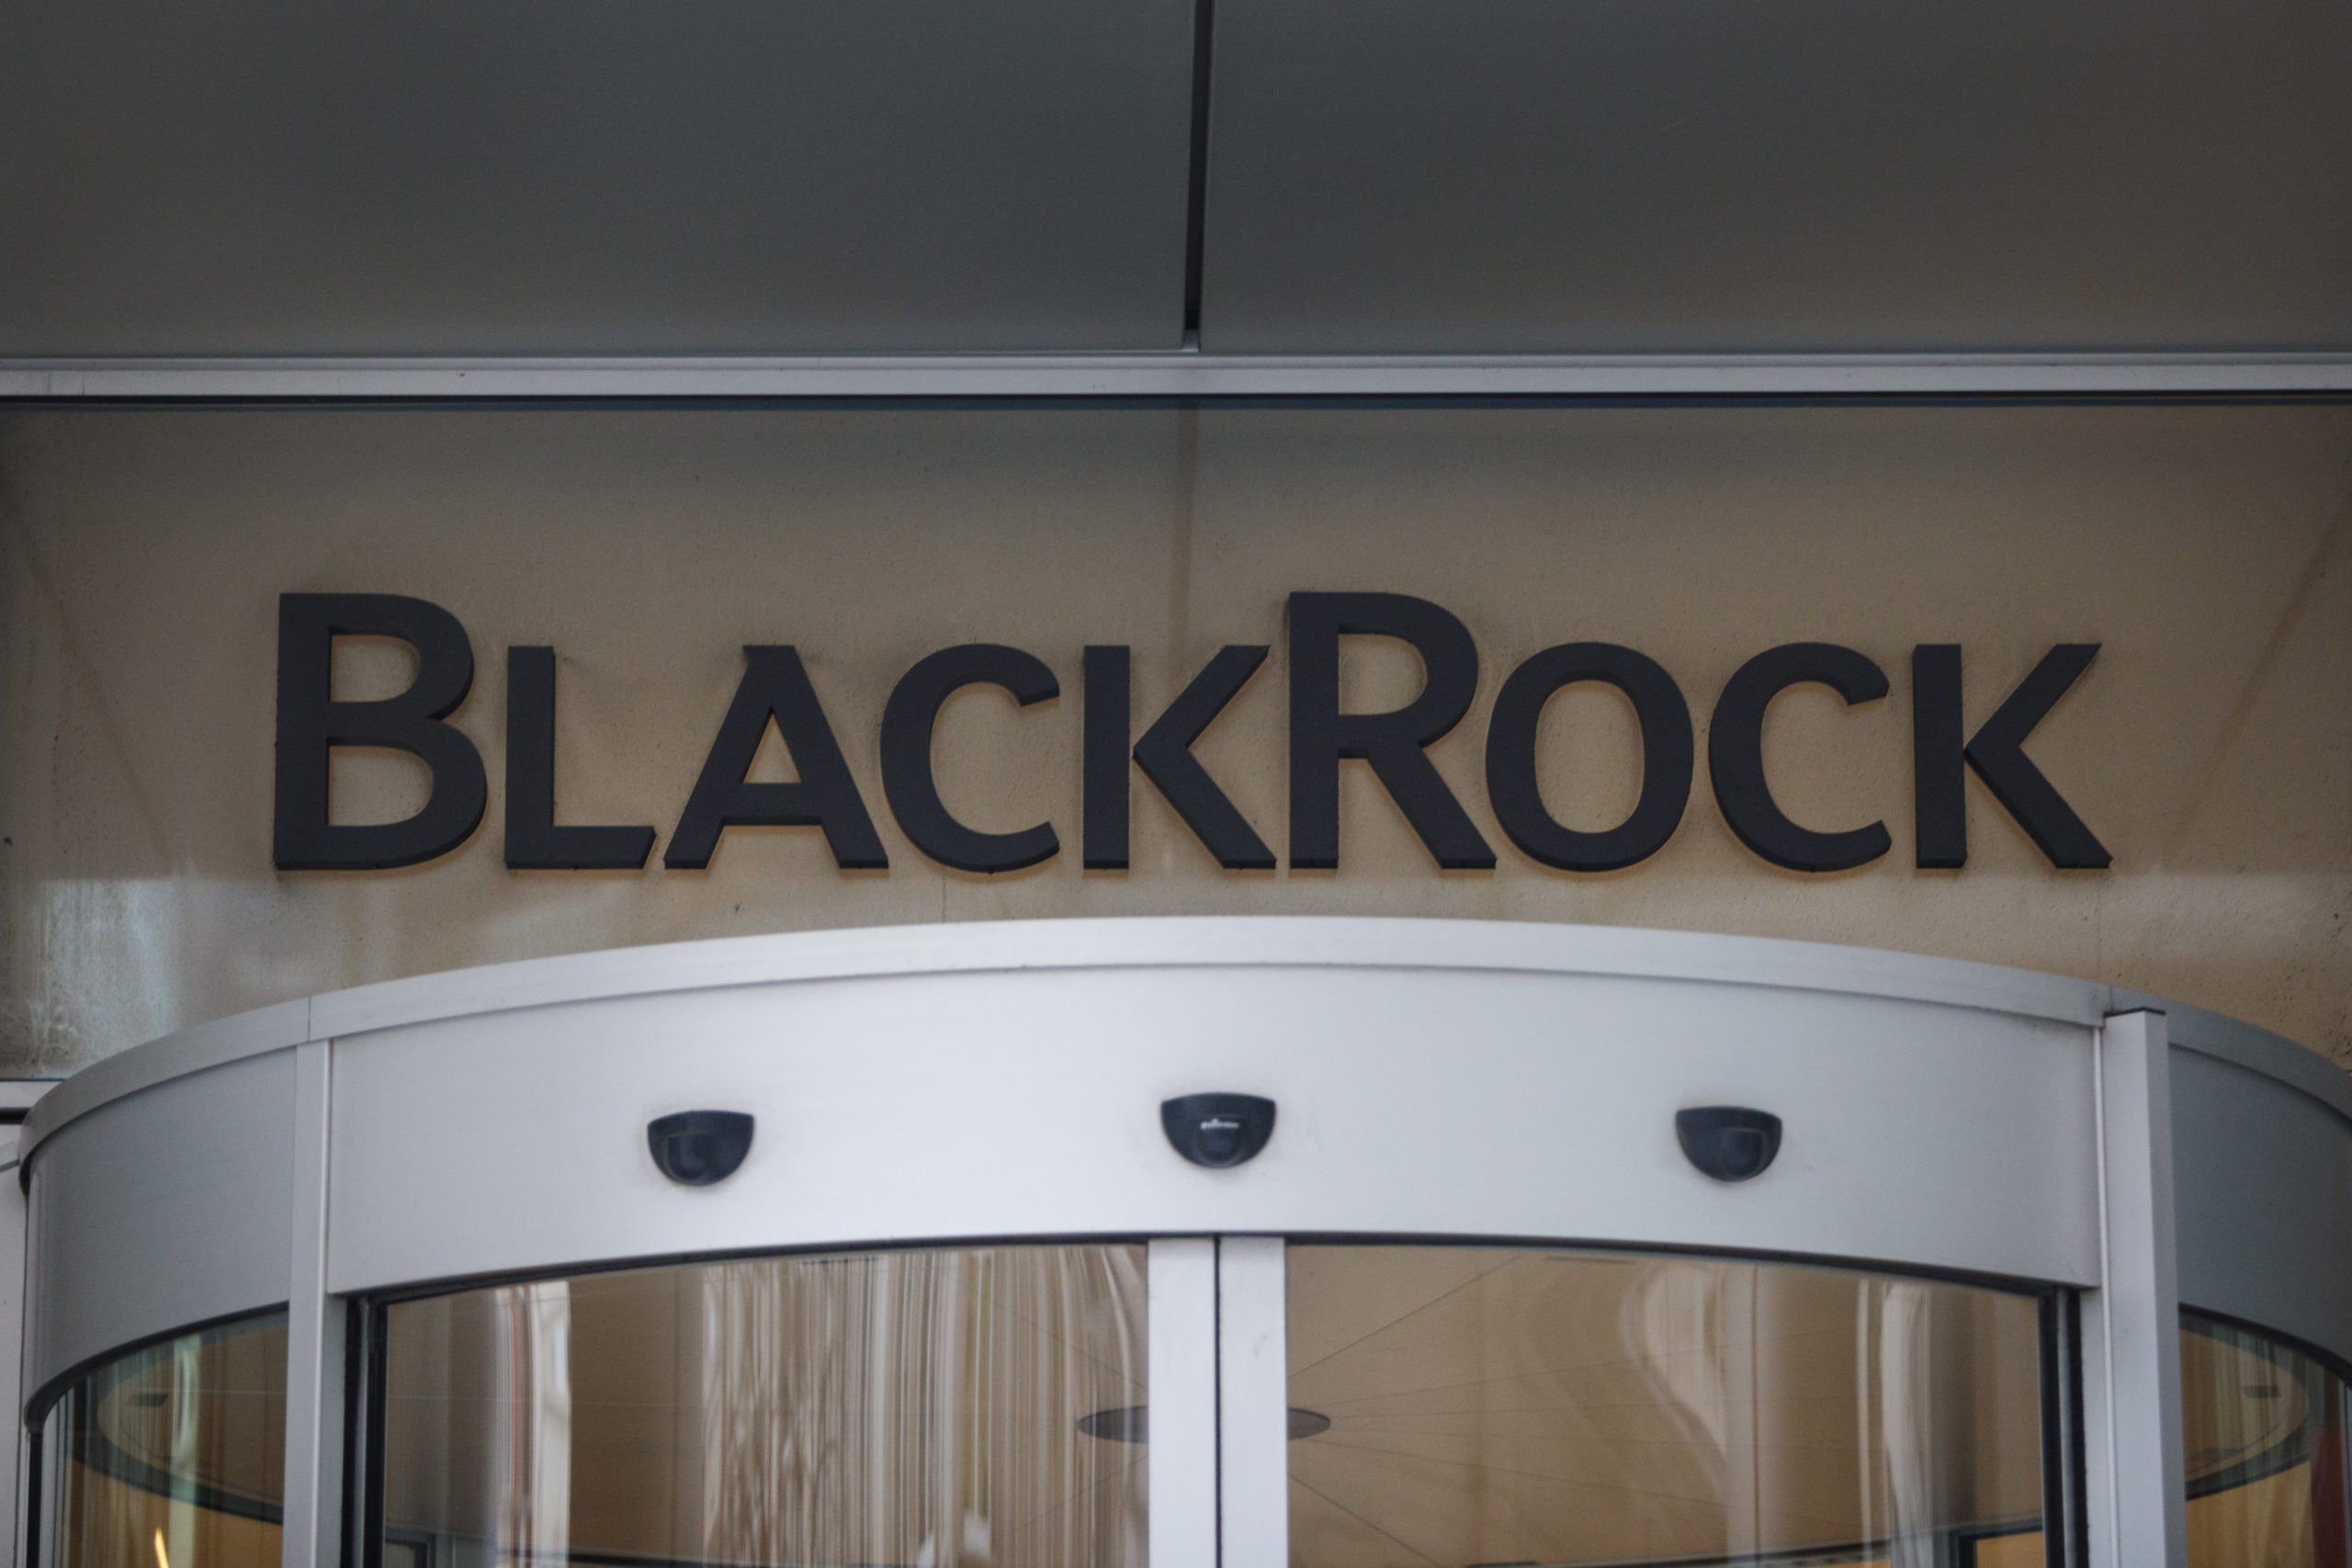 LONDON, ENGLAND - JANUARY 26: A general view of the UK headquarters of BlackRock on January 26, 2017 in London, England. Former British Chancellor George Osborne is to work part-time as an advisor at global investment management firm BlackRock. (Photo by Jack Taylor/Getty Images)